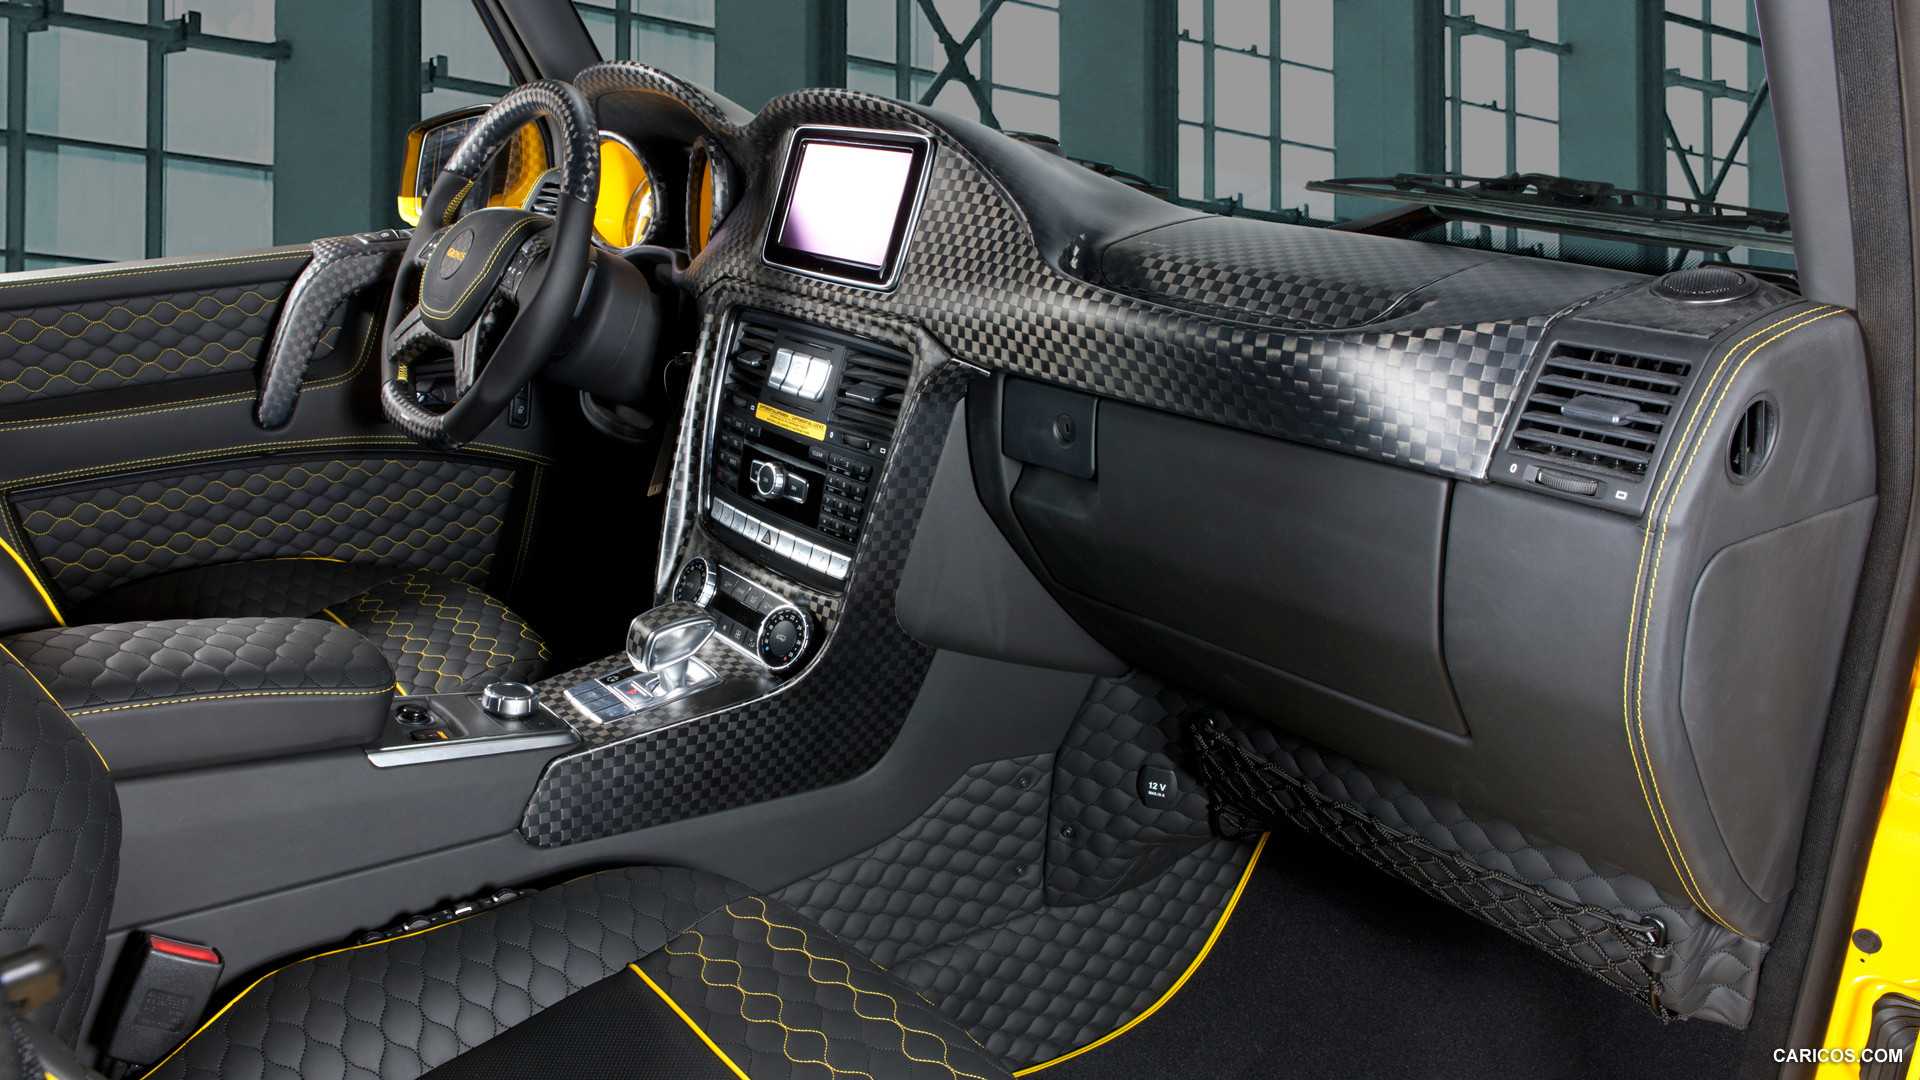 2013 Mansory Gronos based on Mercedes-Benz G-Class AMG  - Interior, #4 of 7